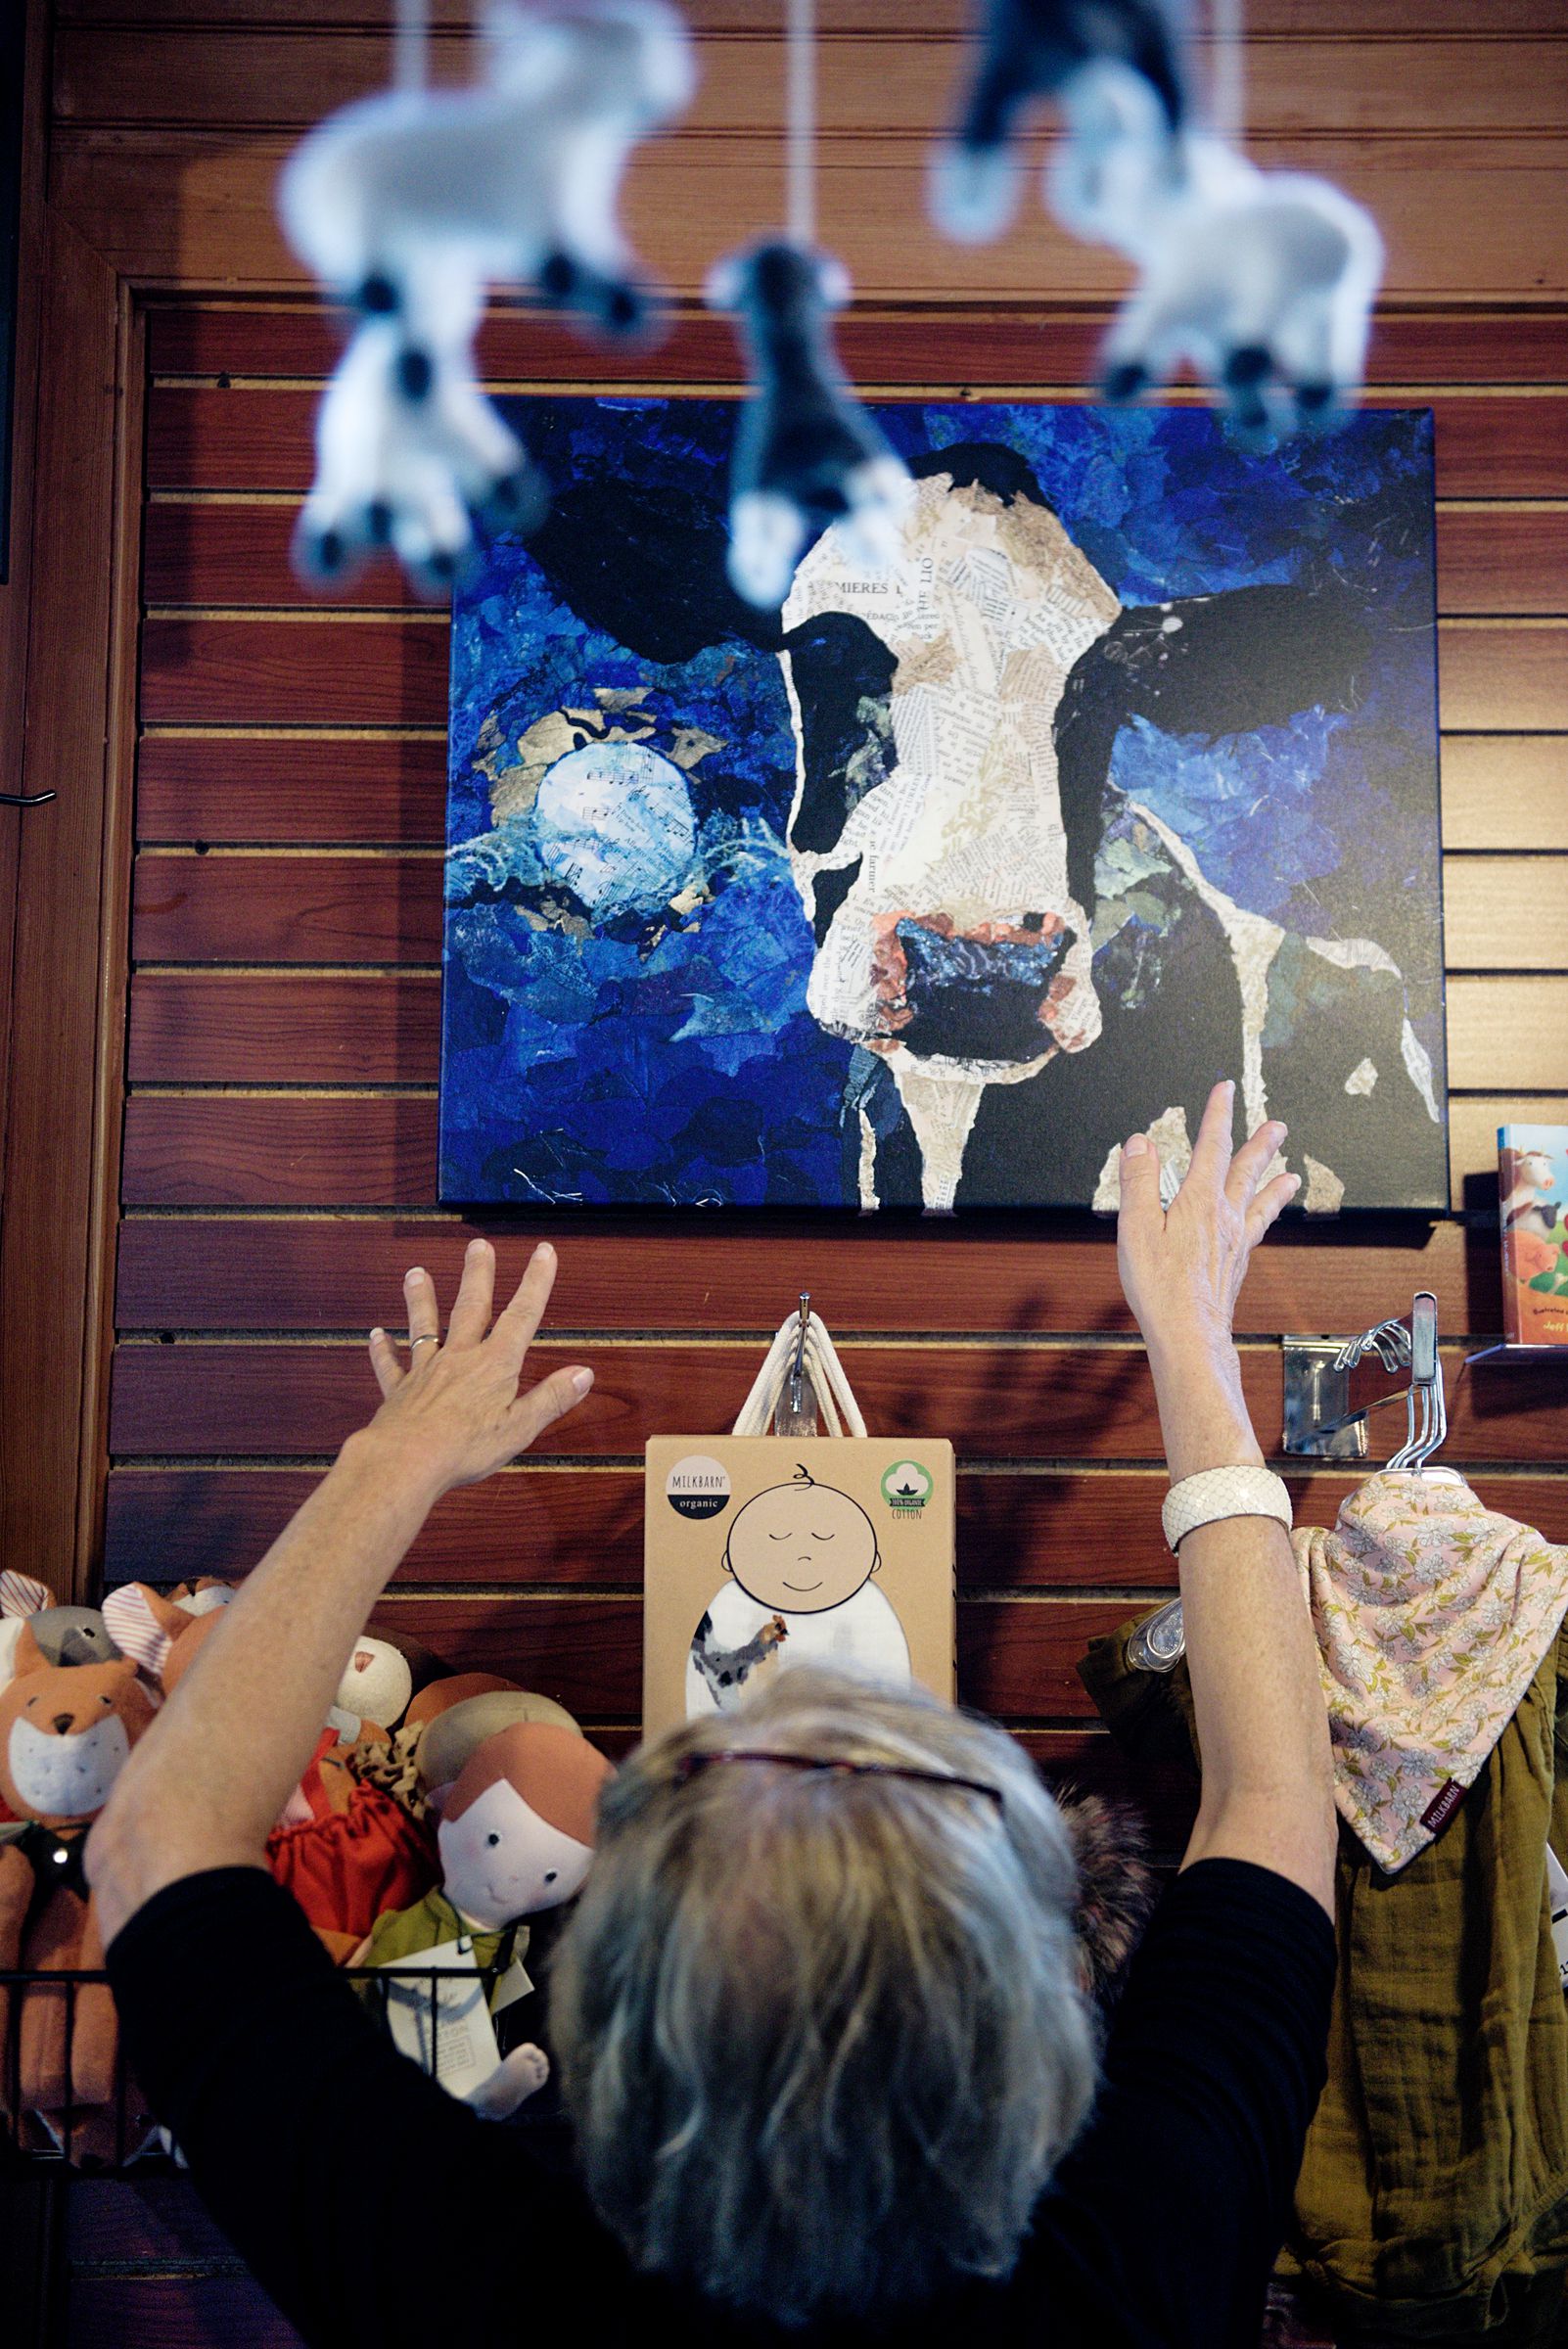 Liz Joyce straightens a piece of art on the wall of her story Country Kids at the Powerhouse mall in West lebanon, N.H., Wednesday, June 26, 2019. (Valley News - James M. Patterson) Copyright Valley News. May not be reprinted or used online without permission. Send requests to permission@vnews.com.